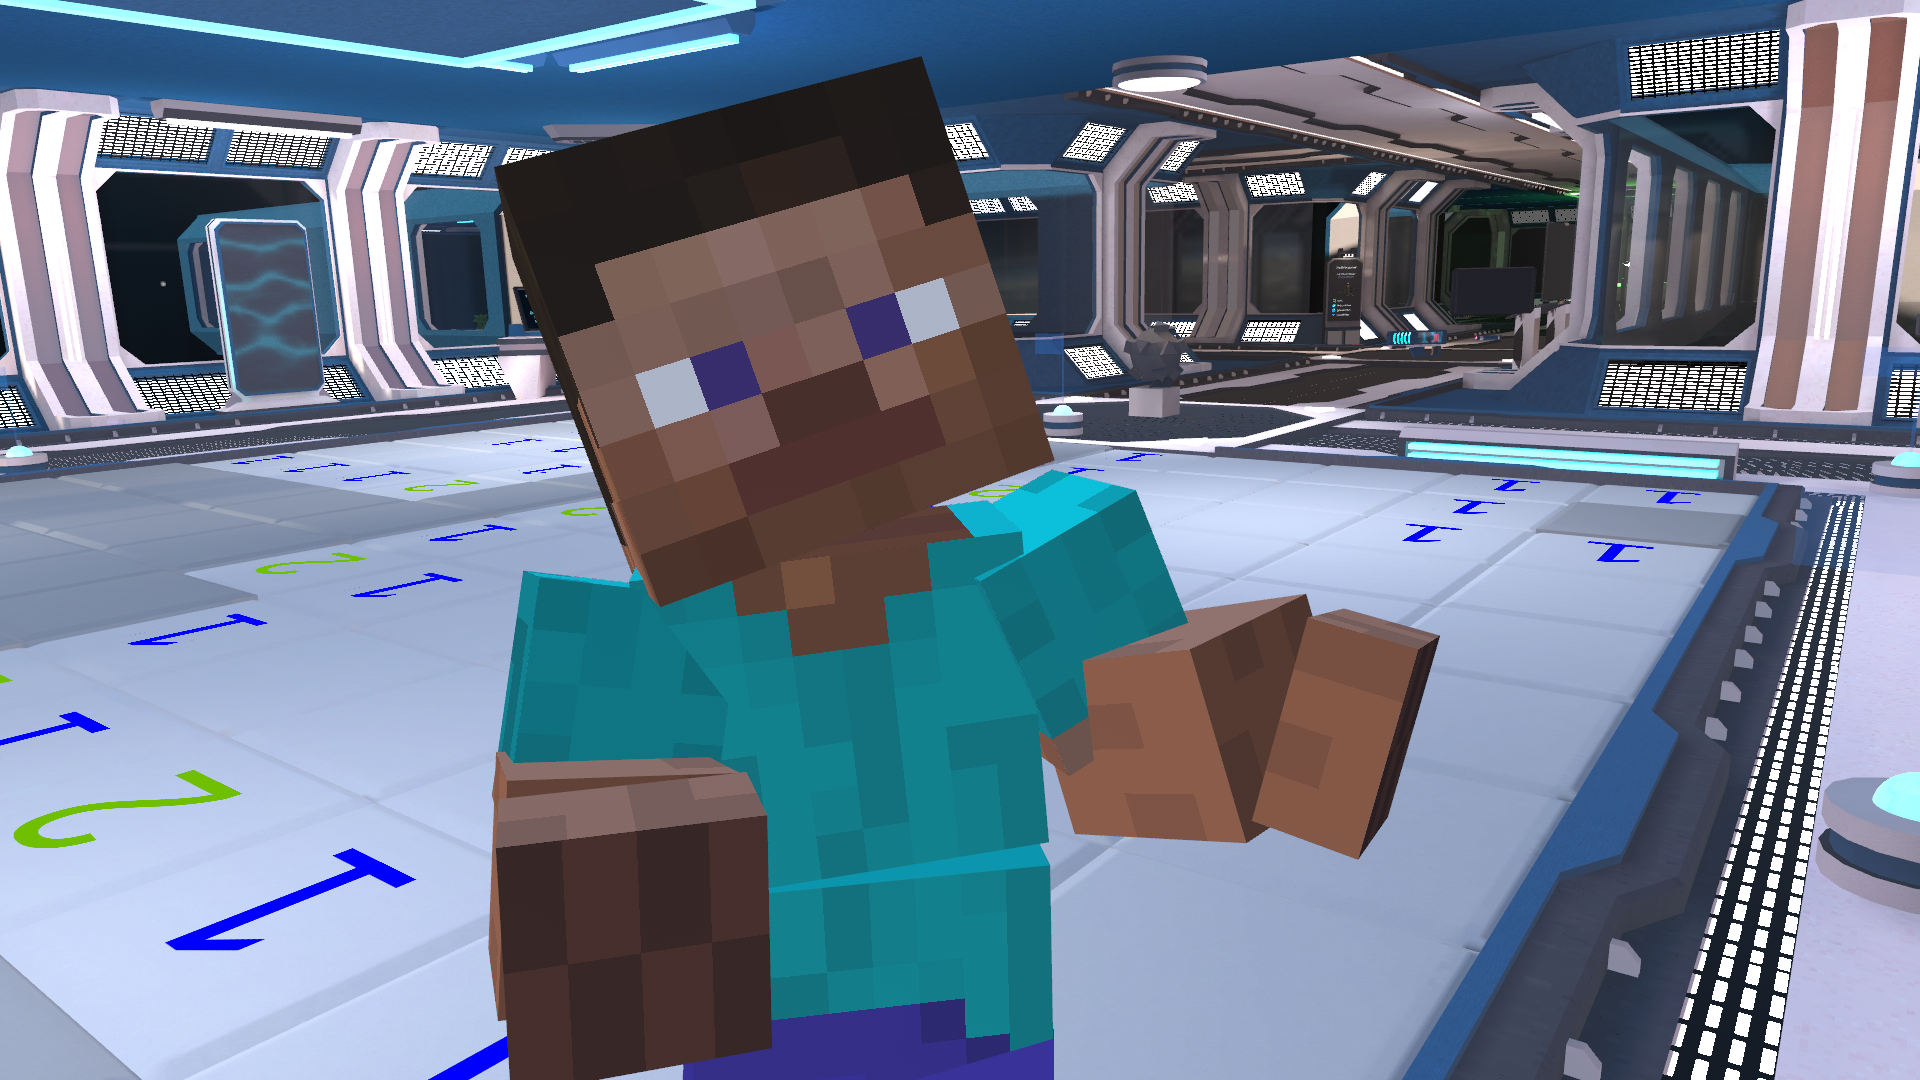 Steve from Minecraft in a Minesweeper world, designed to look like a futuristic ship.